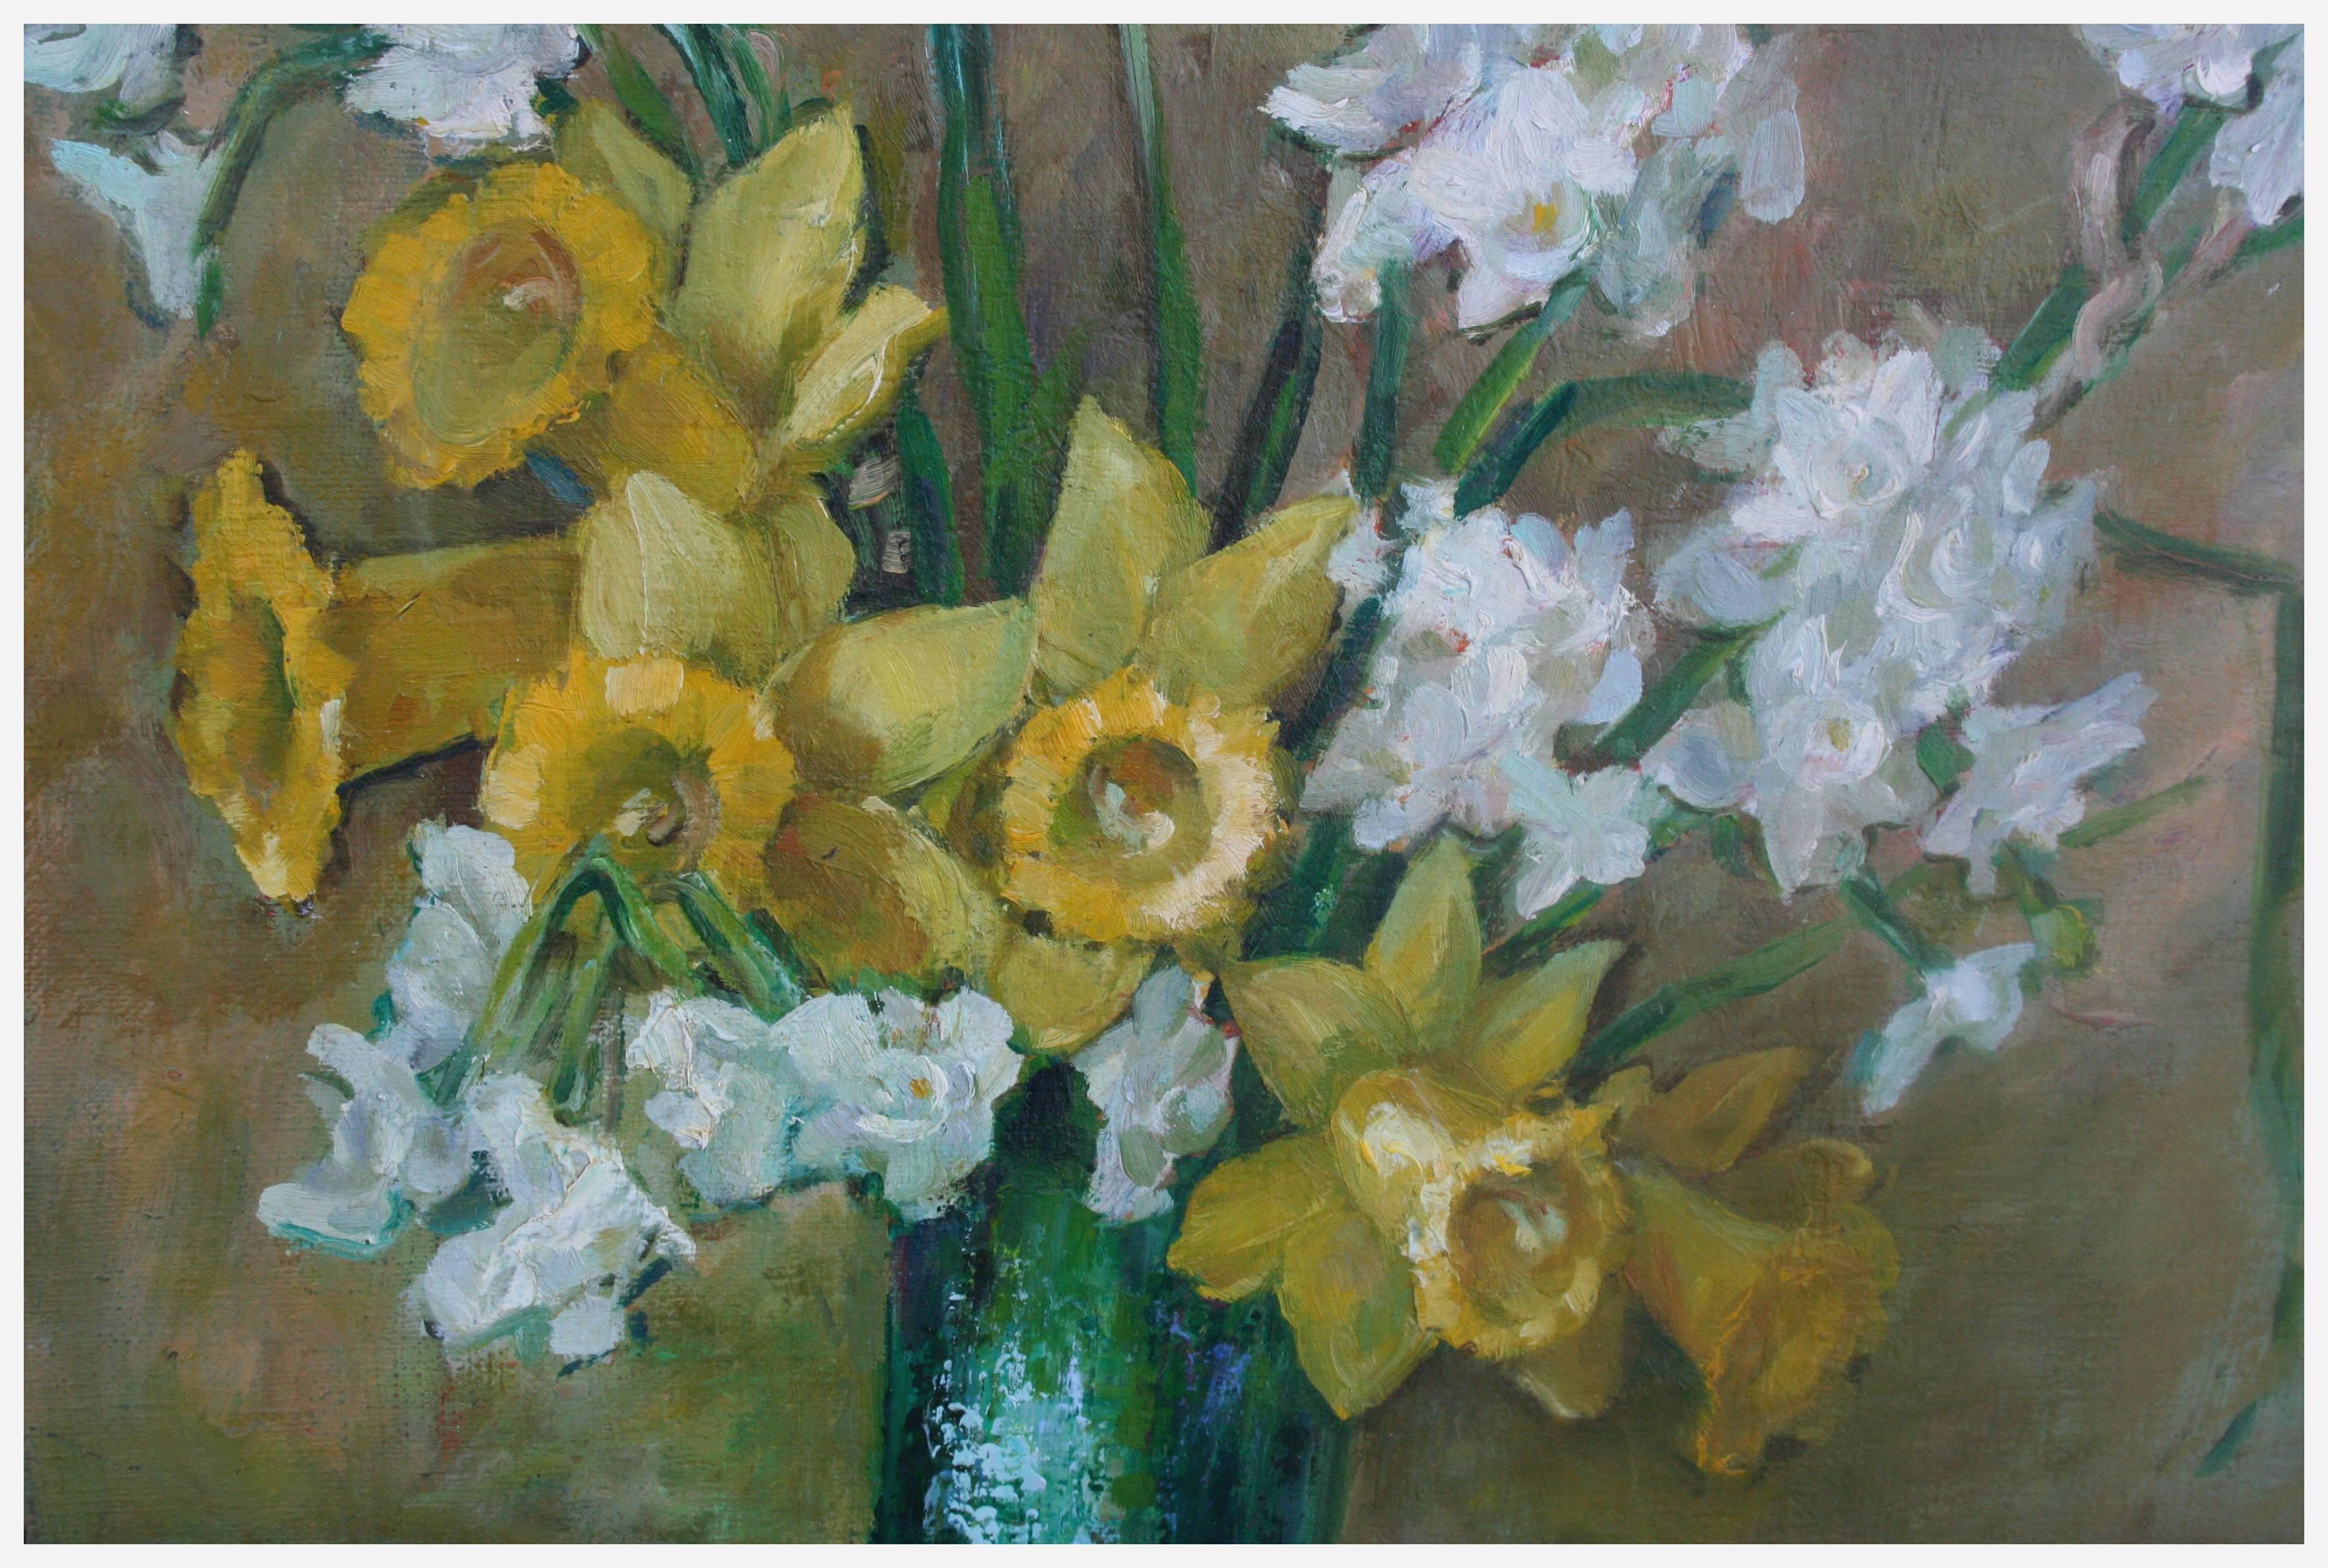 Daffodils in a Green Vase - Painting by Helen Enoch Gleiforst